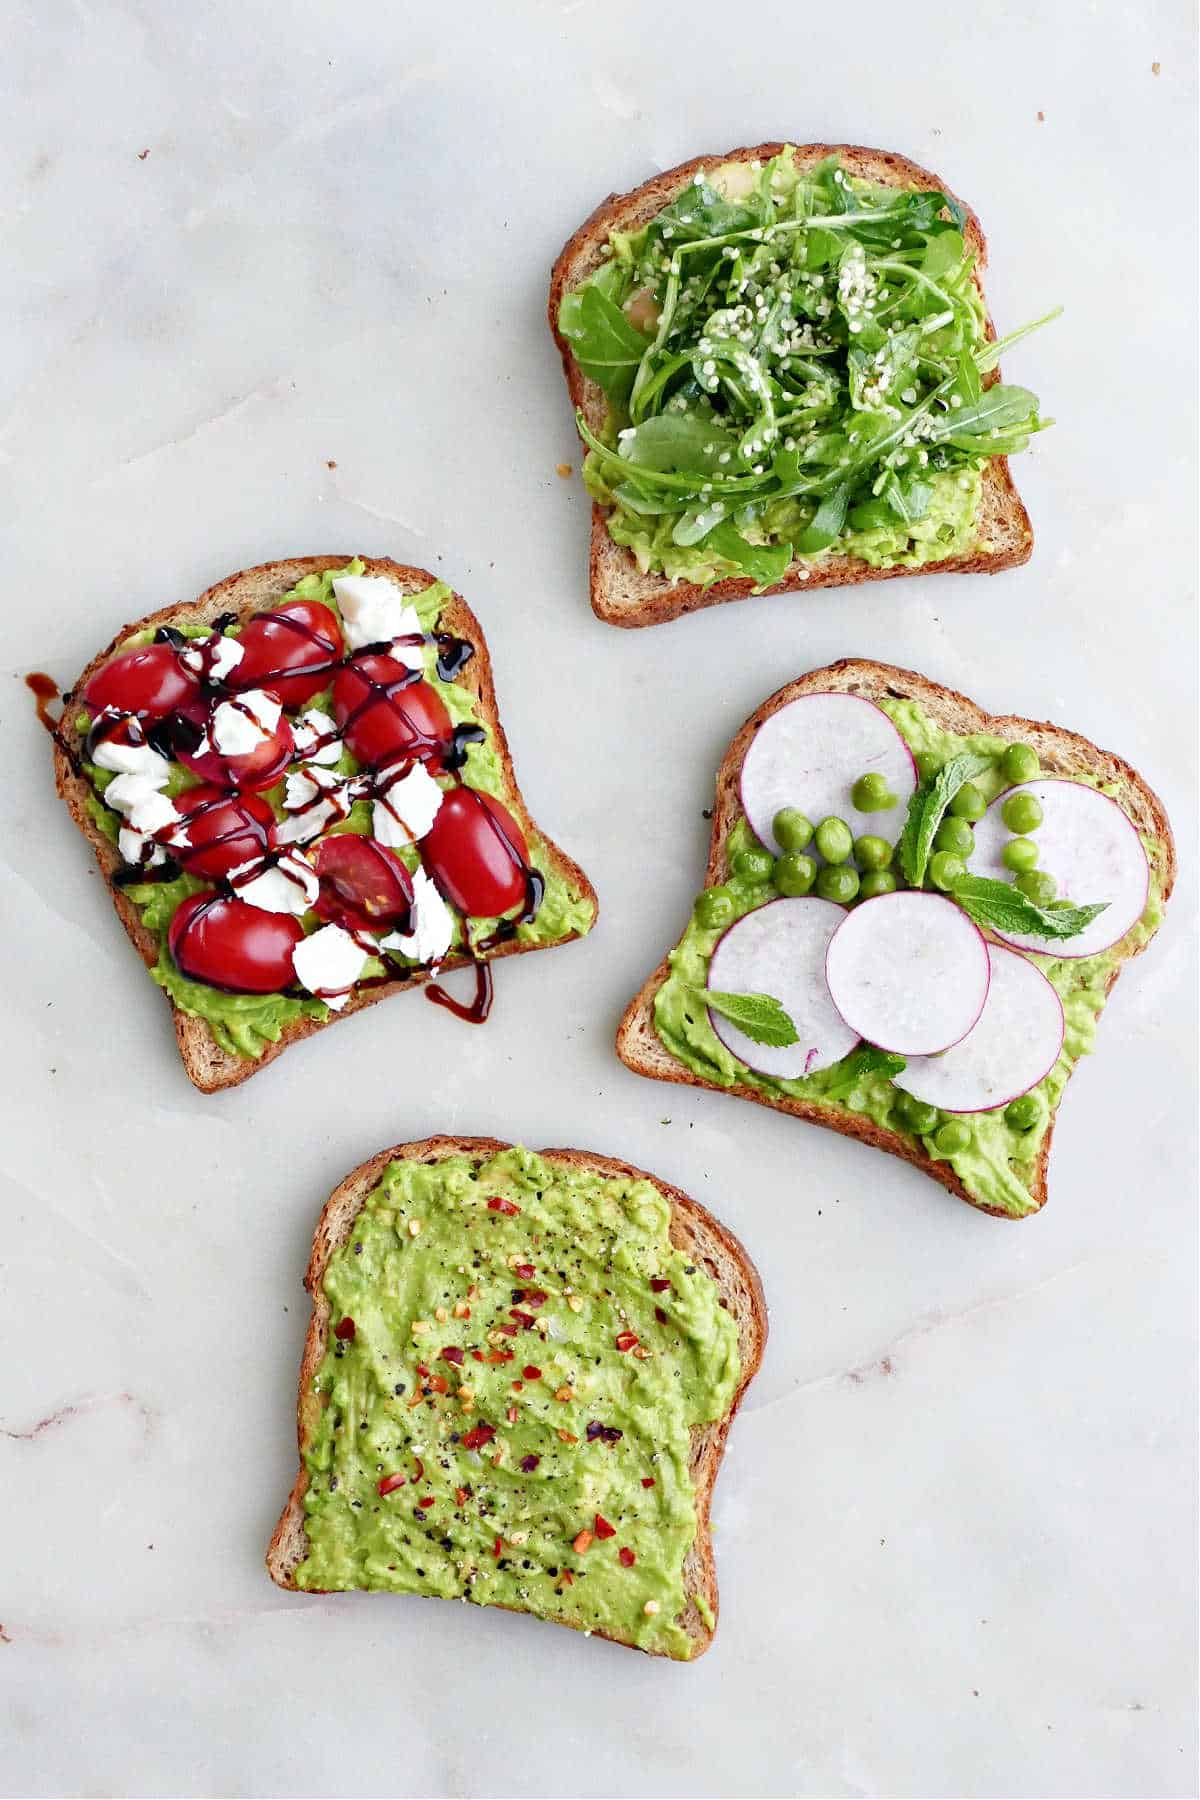 avocado toast with arugula, caprese, radishes and peas, and classic seasonings on a counter